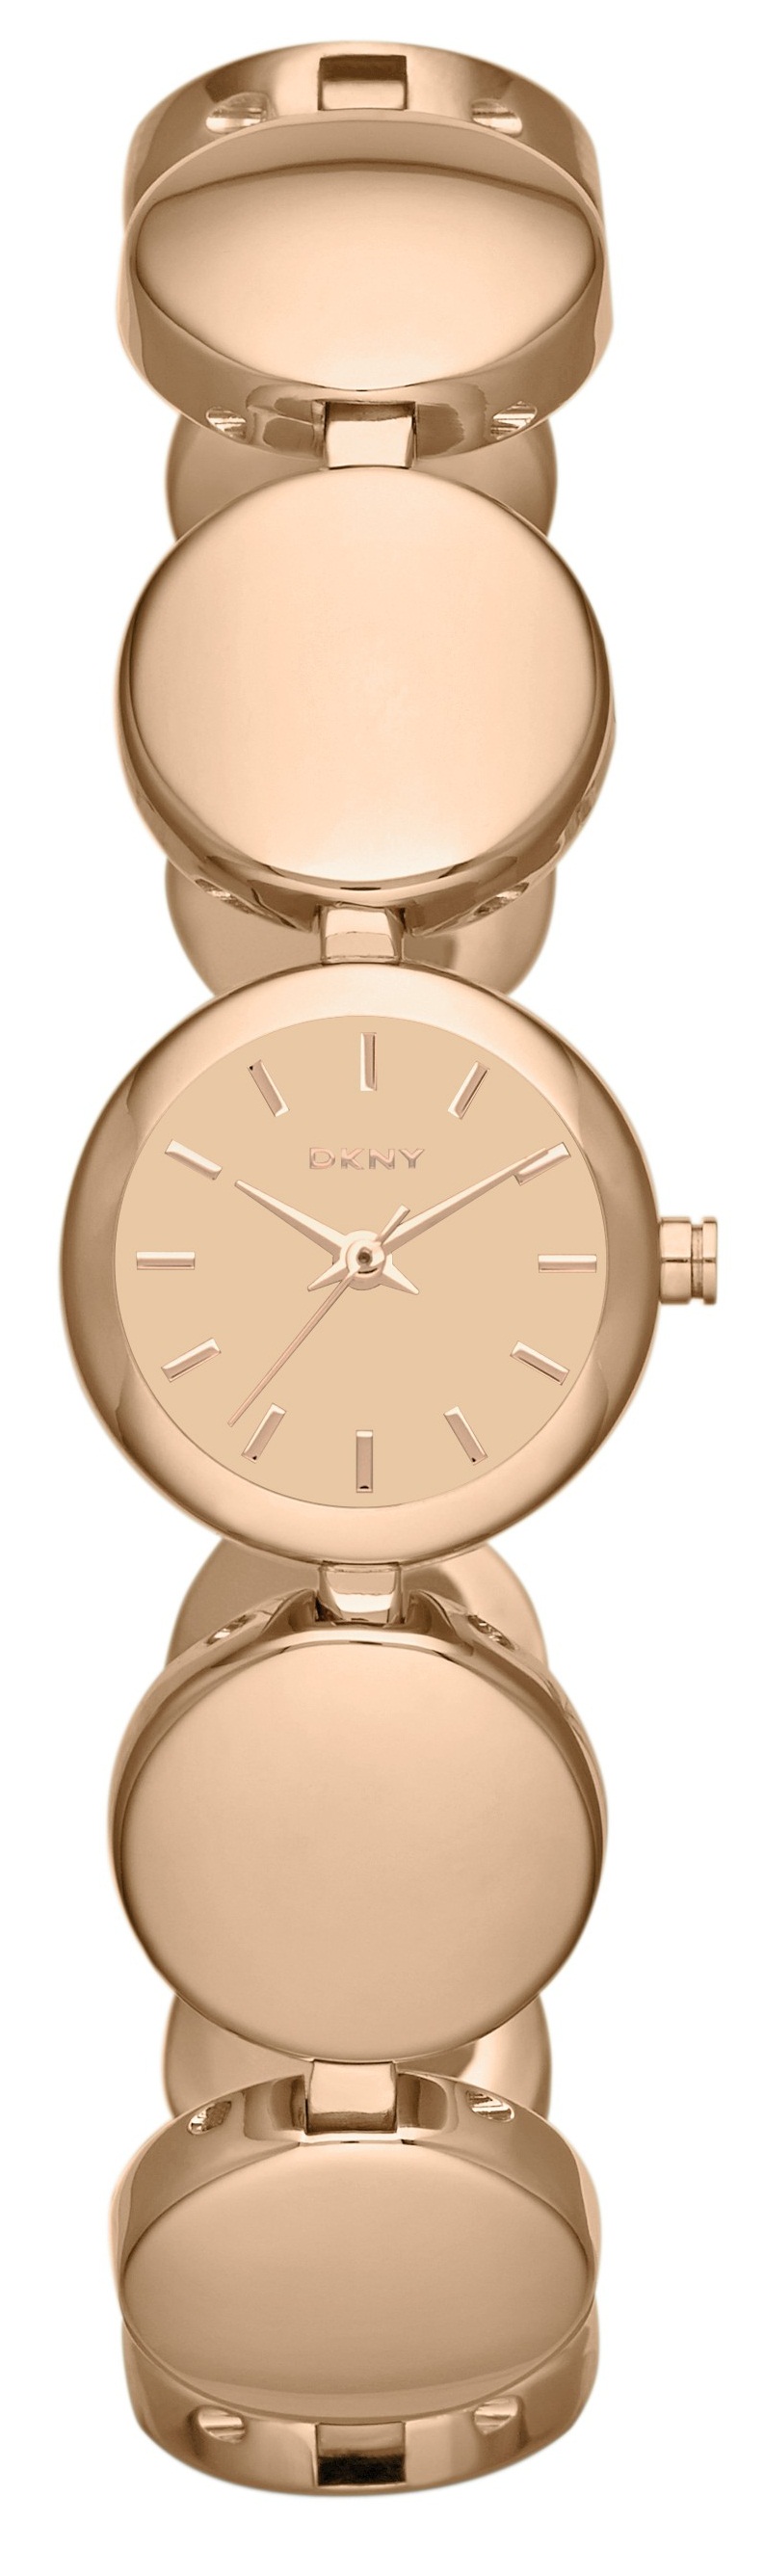 DKNY Ladies Roundabout Rose Watch 20mm